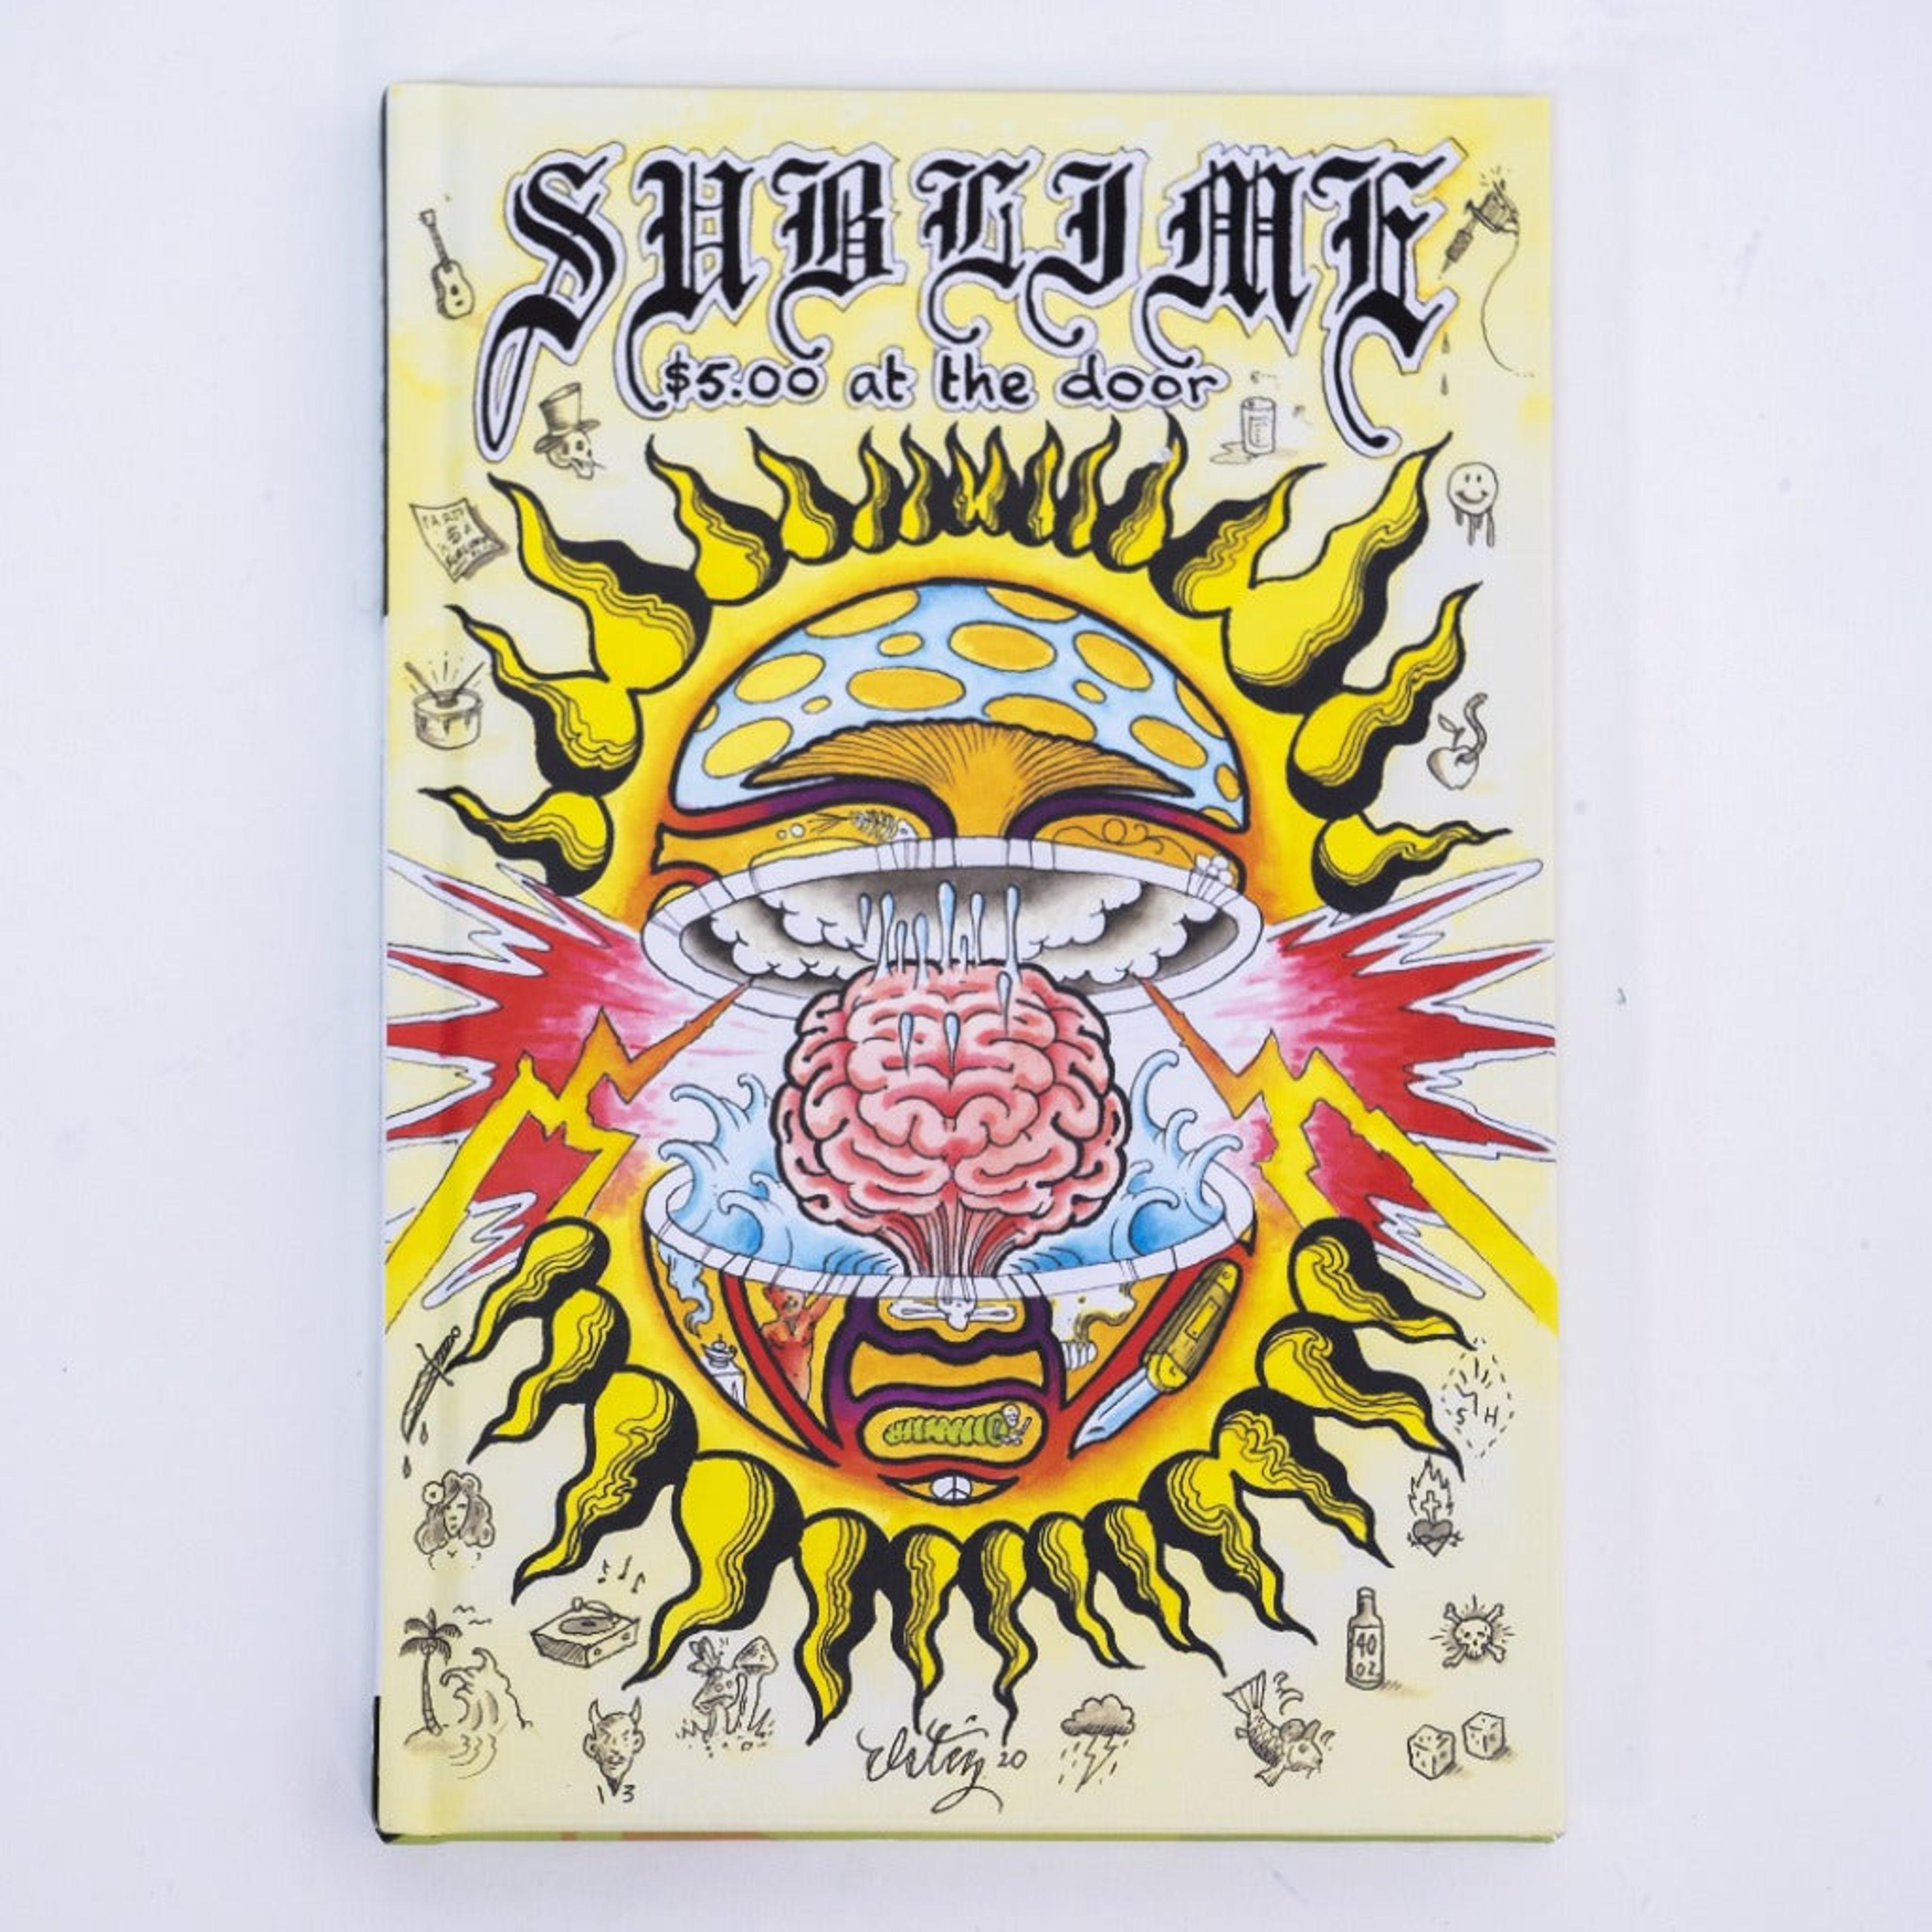 Sublime: $5 at the Door - Hardcover